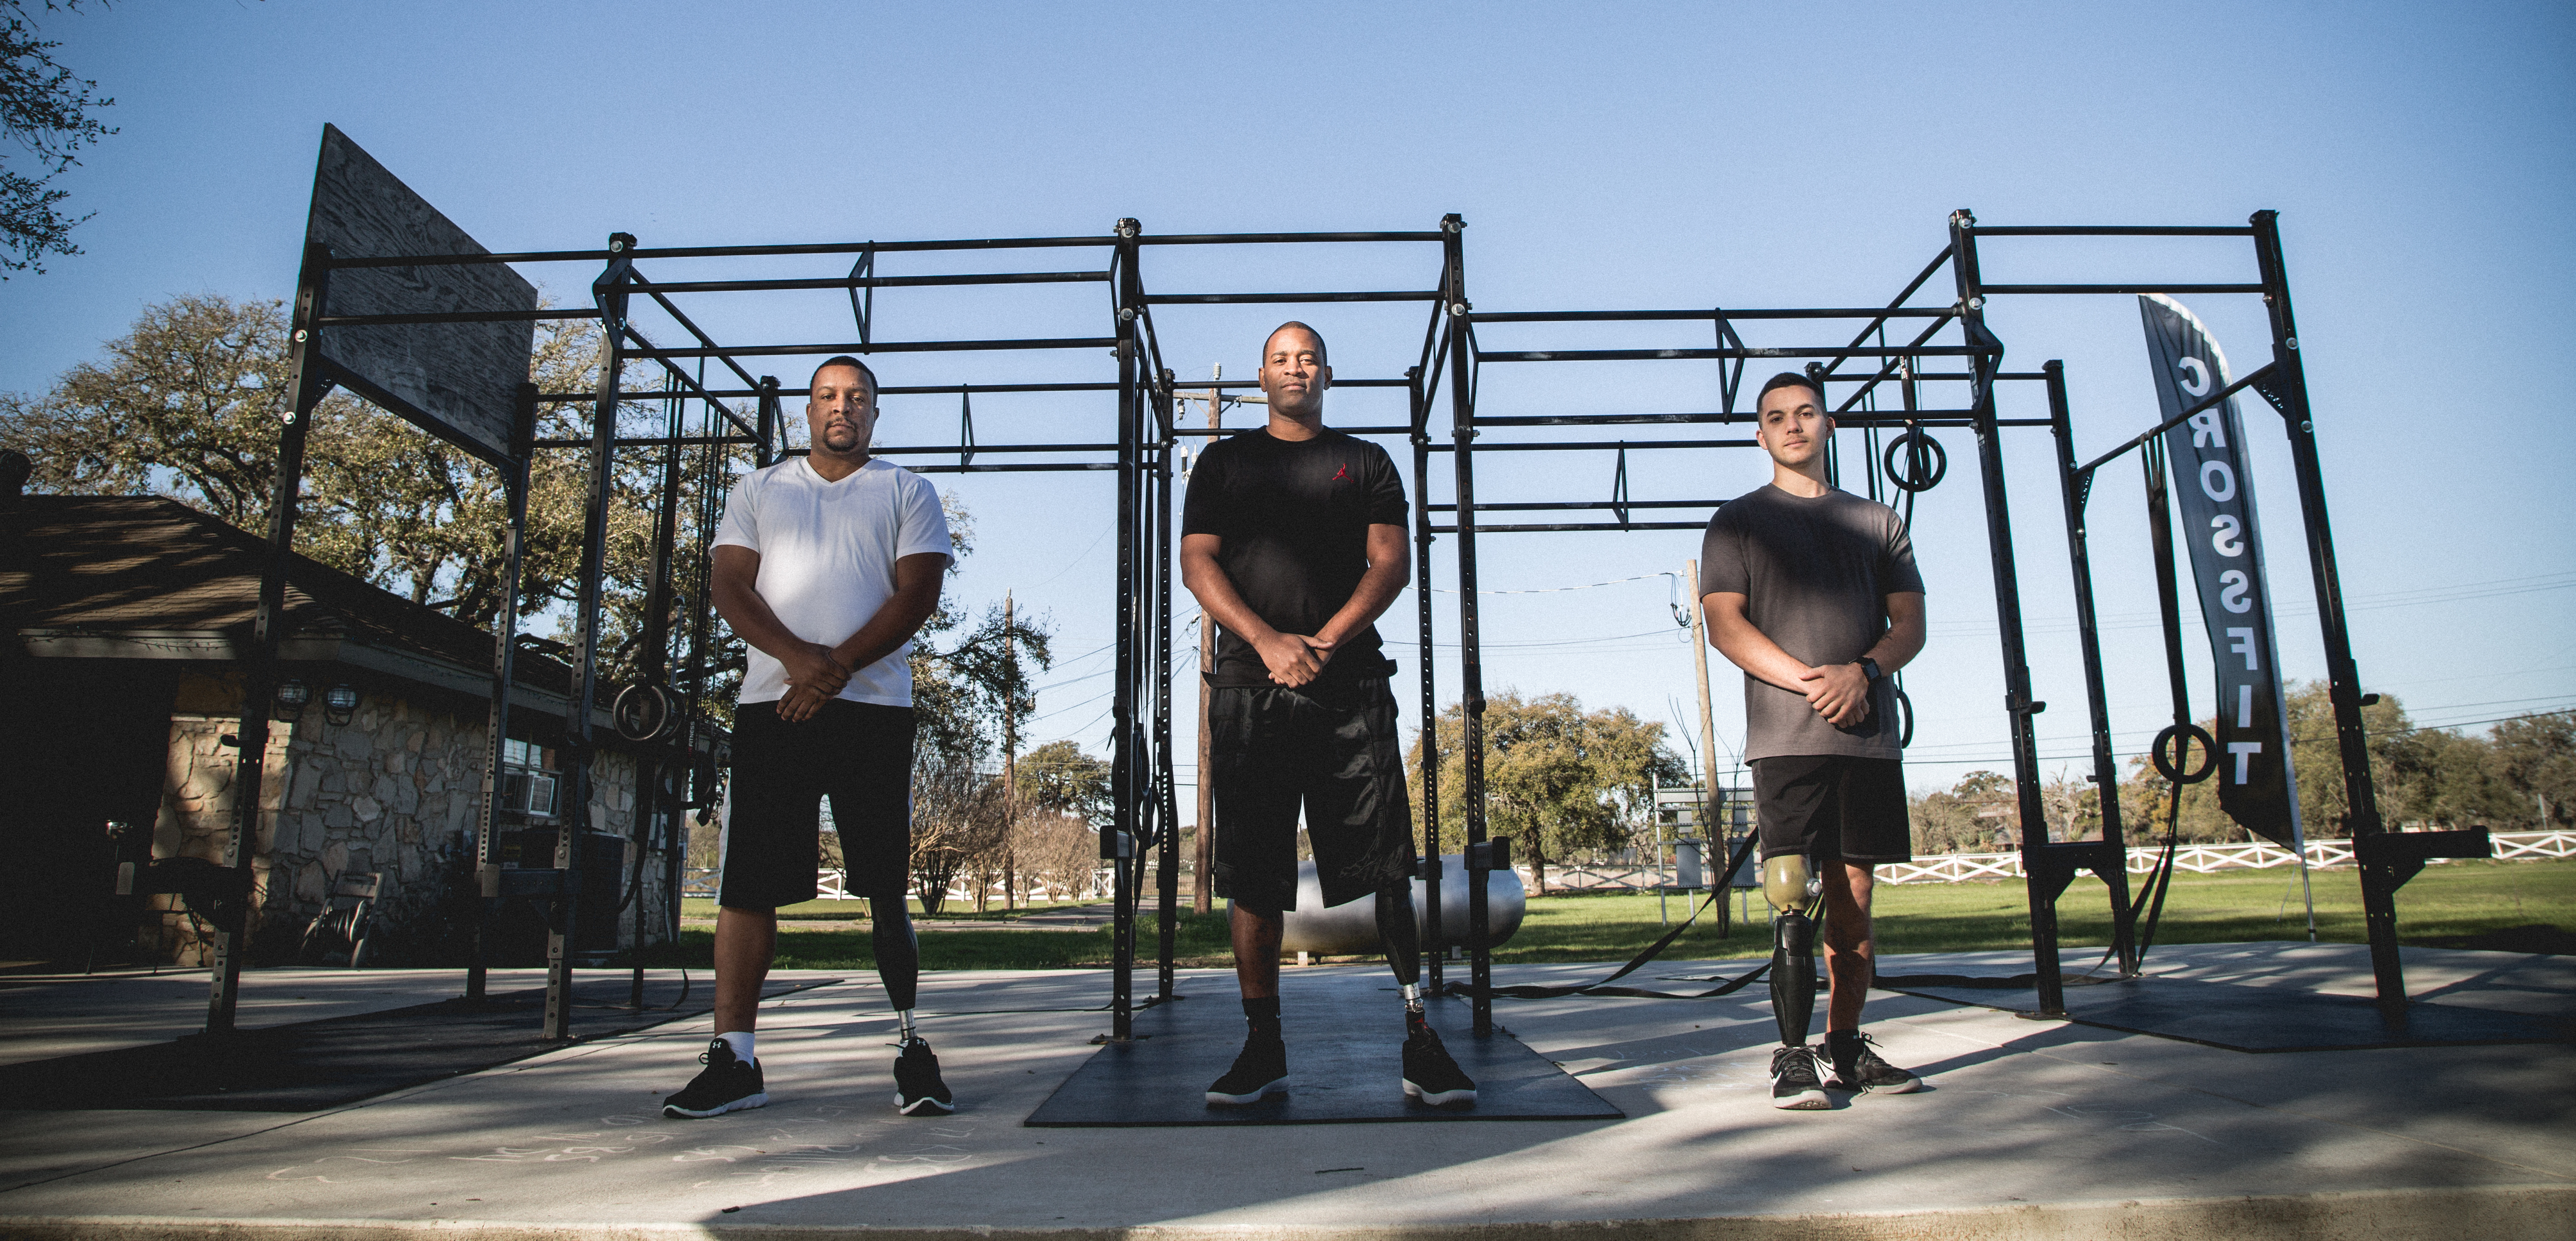 Three male amputee veterans stand side by side in a workout area and pose for the camera